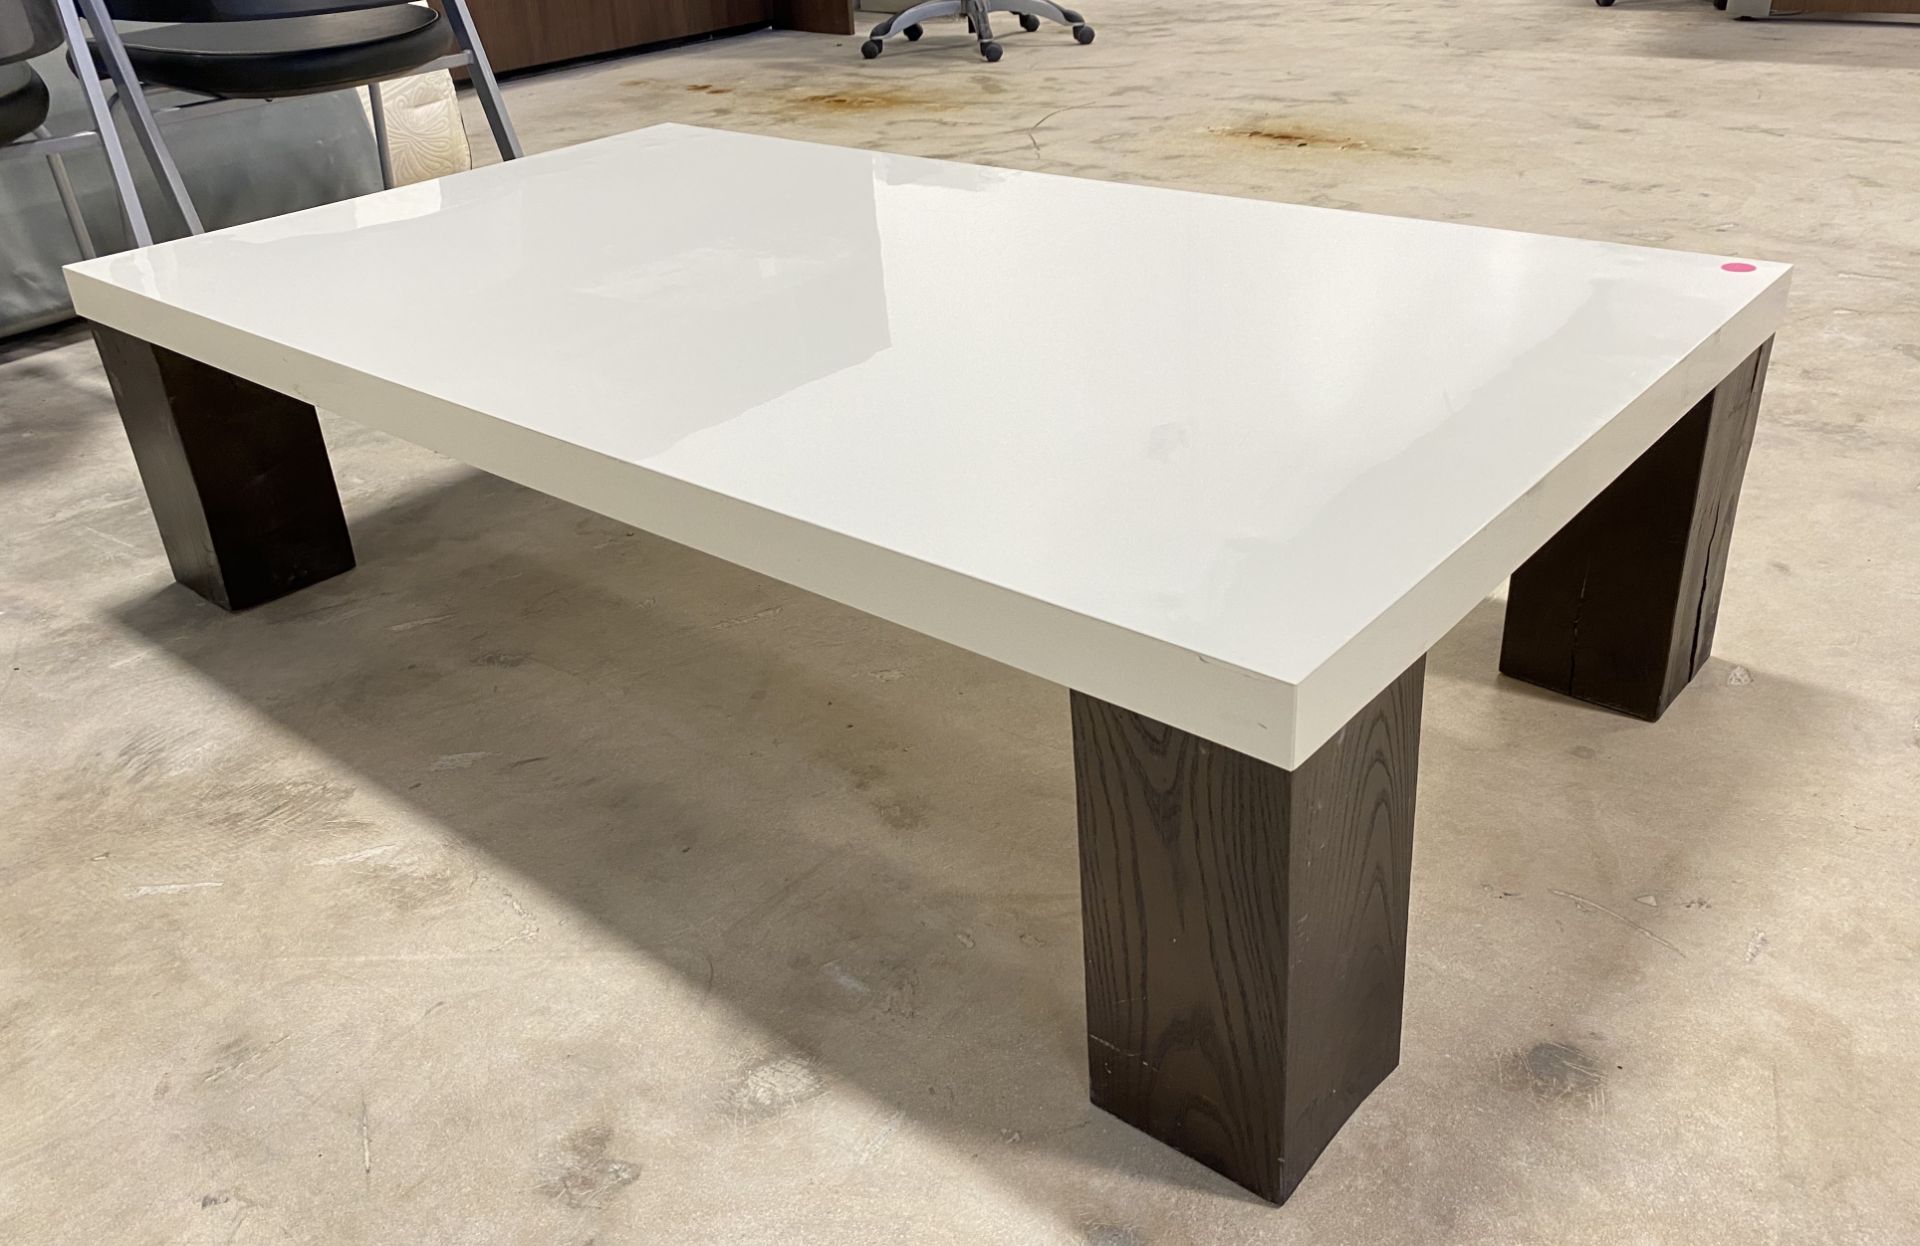 MODERN WHITE AND BROWN COFFEE TABLE - Image 3 of 3